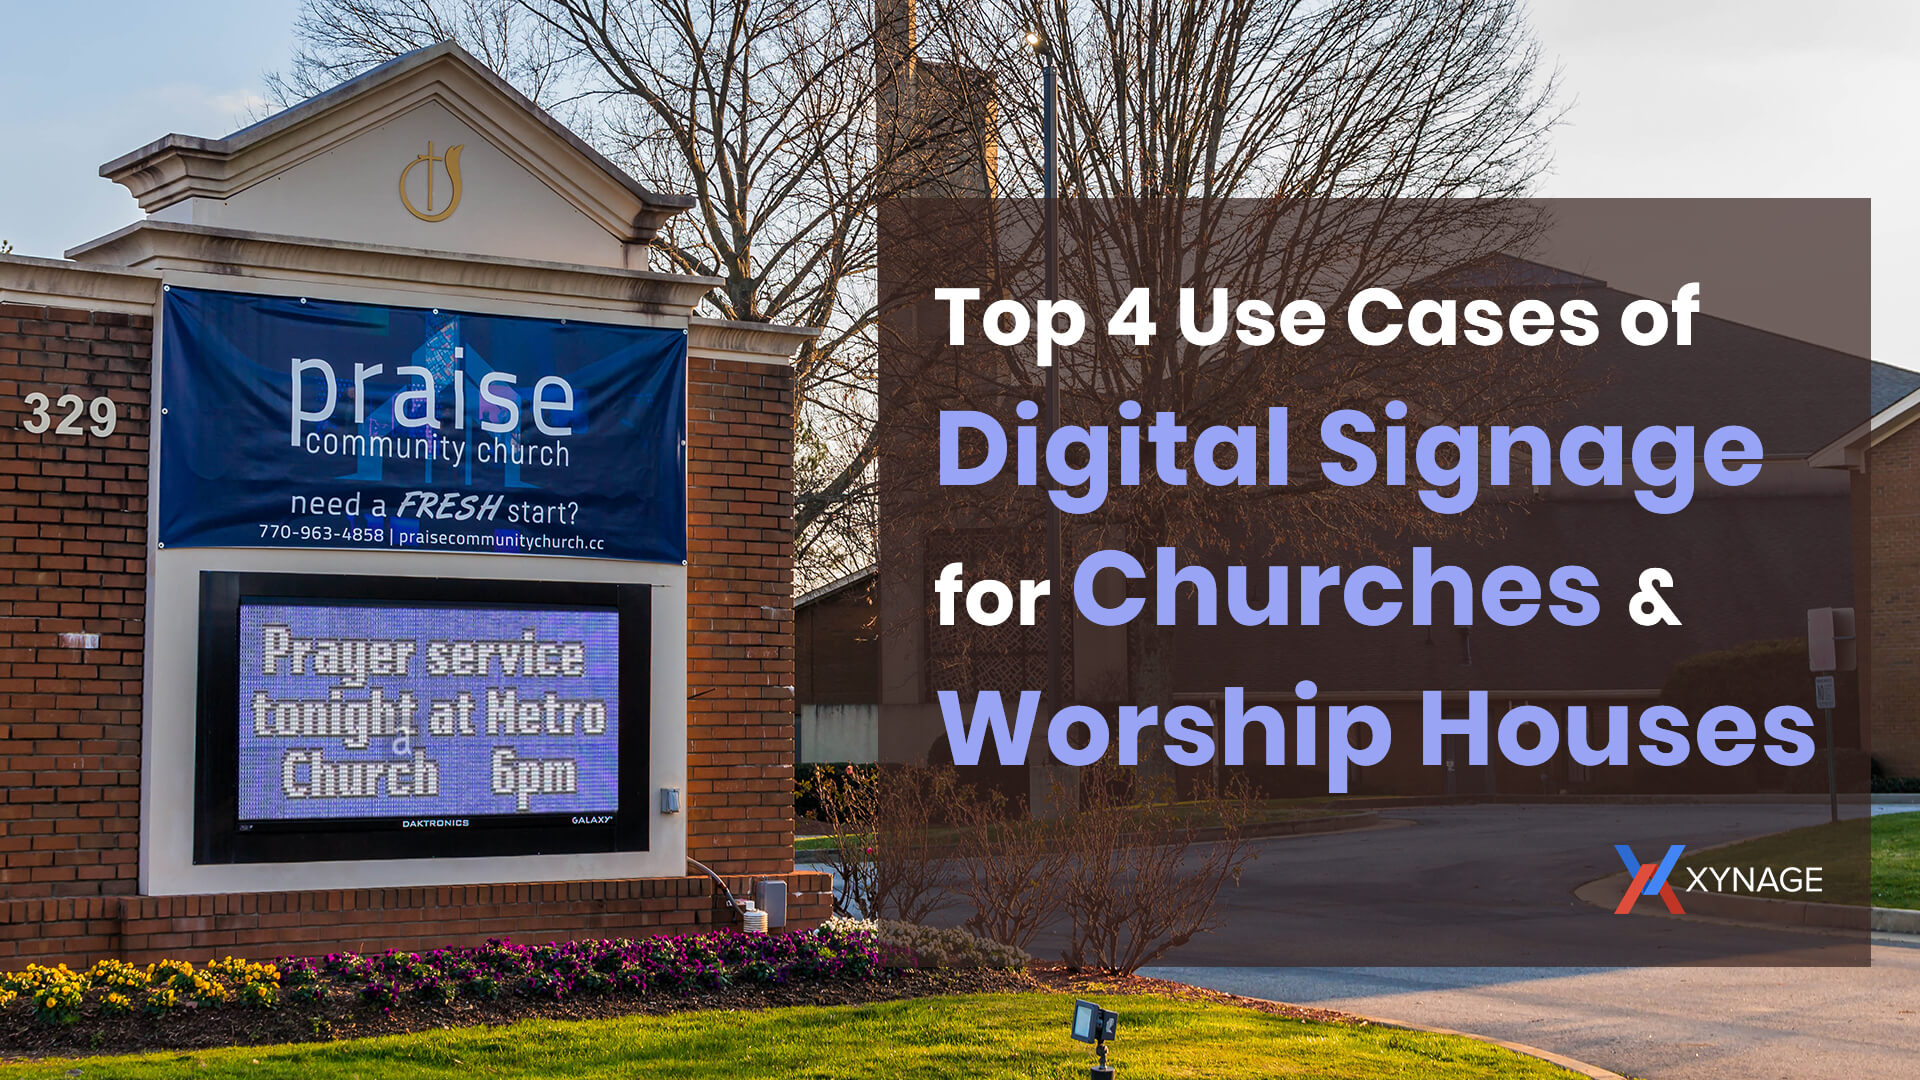 Top 4 Use Cases of Digital Signage for Churches and Worship Houses